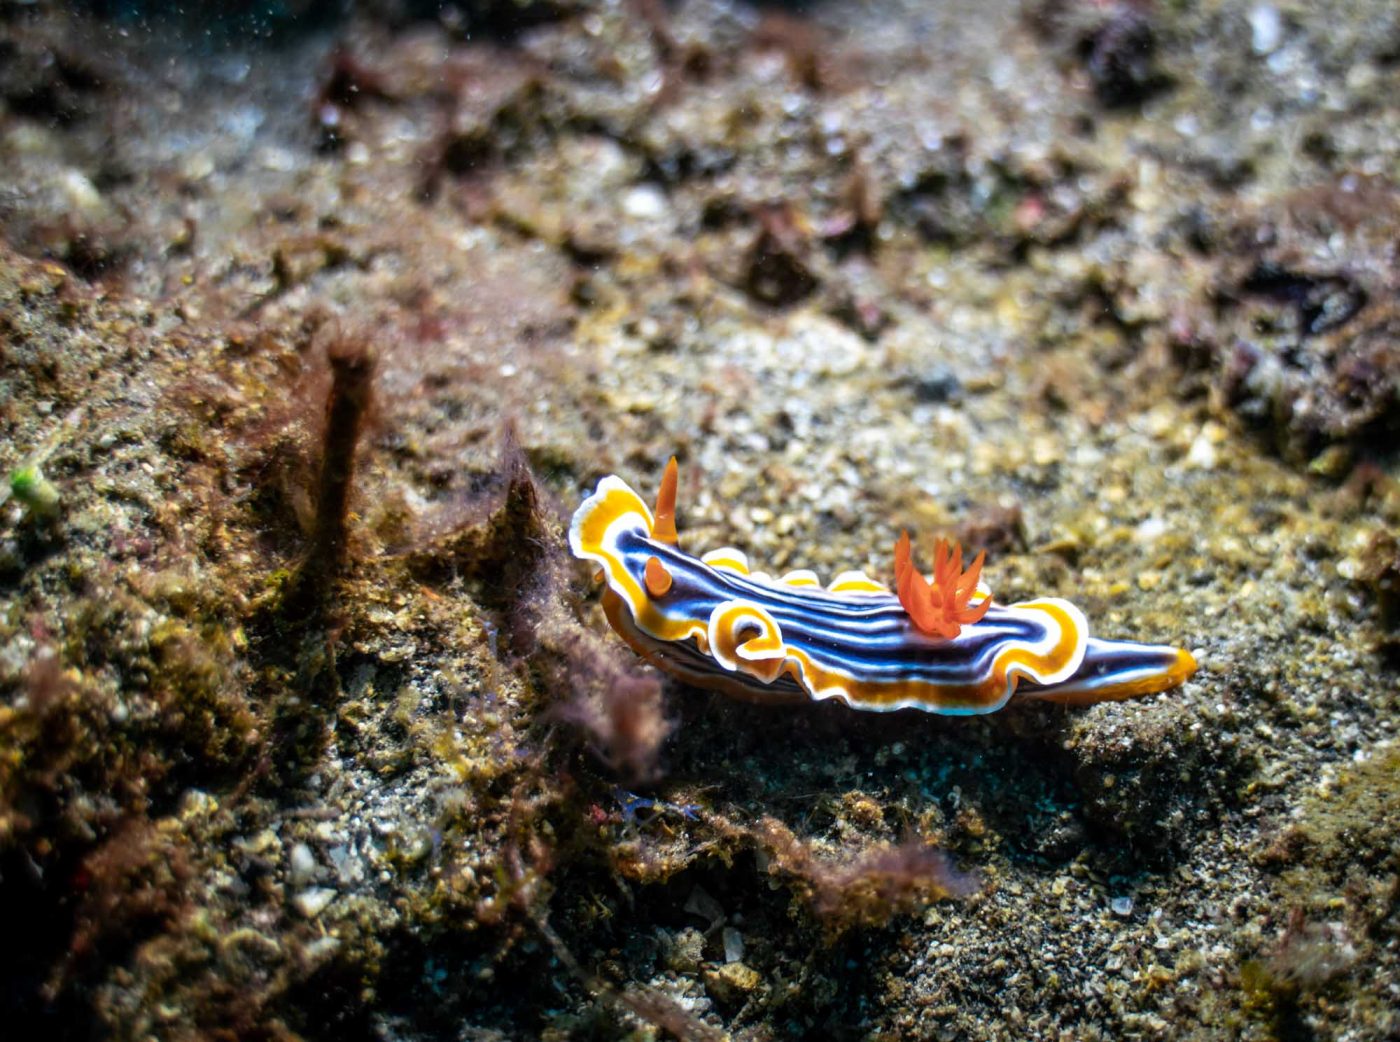 nudibranch found in Lembeh